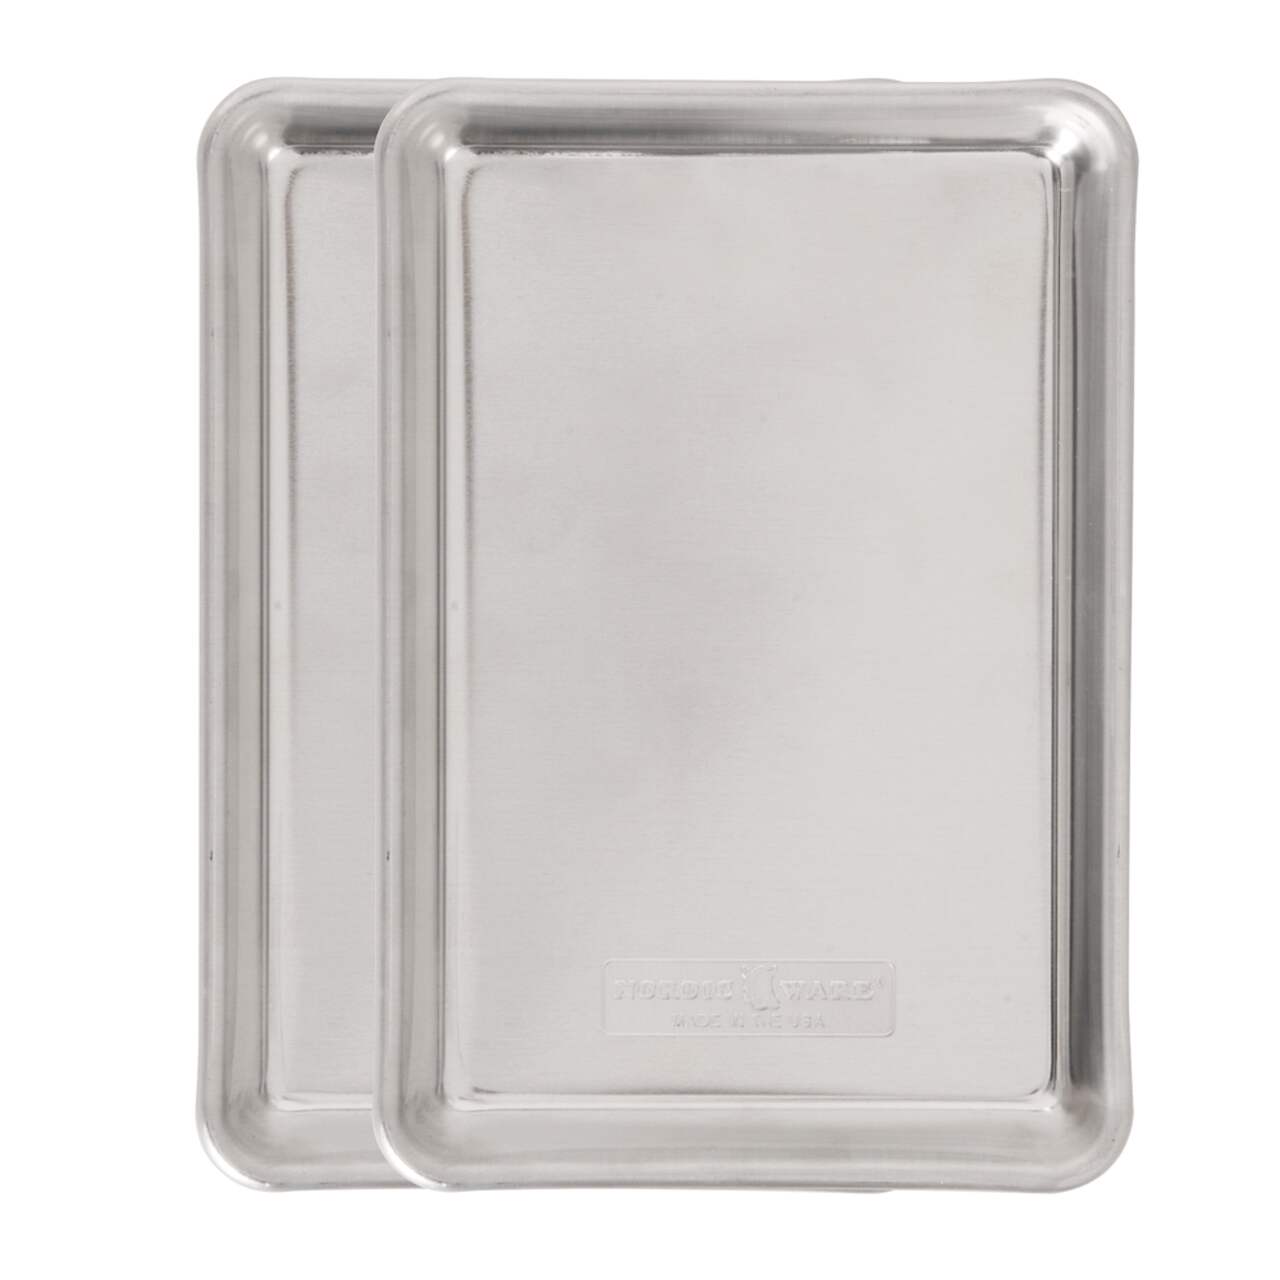 https://media-www.canadiantire.ca/product/living/kitchen/bakeware-baking-prep/1429924/nordicware-naturals-2pk-uncoated-aluminum-eighth-sheet-5b218219-6270-4fdd-9c79-07c612e18810.png?imdensity=1&imwidth=640&impolicy=mZoom